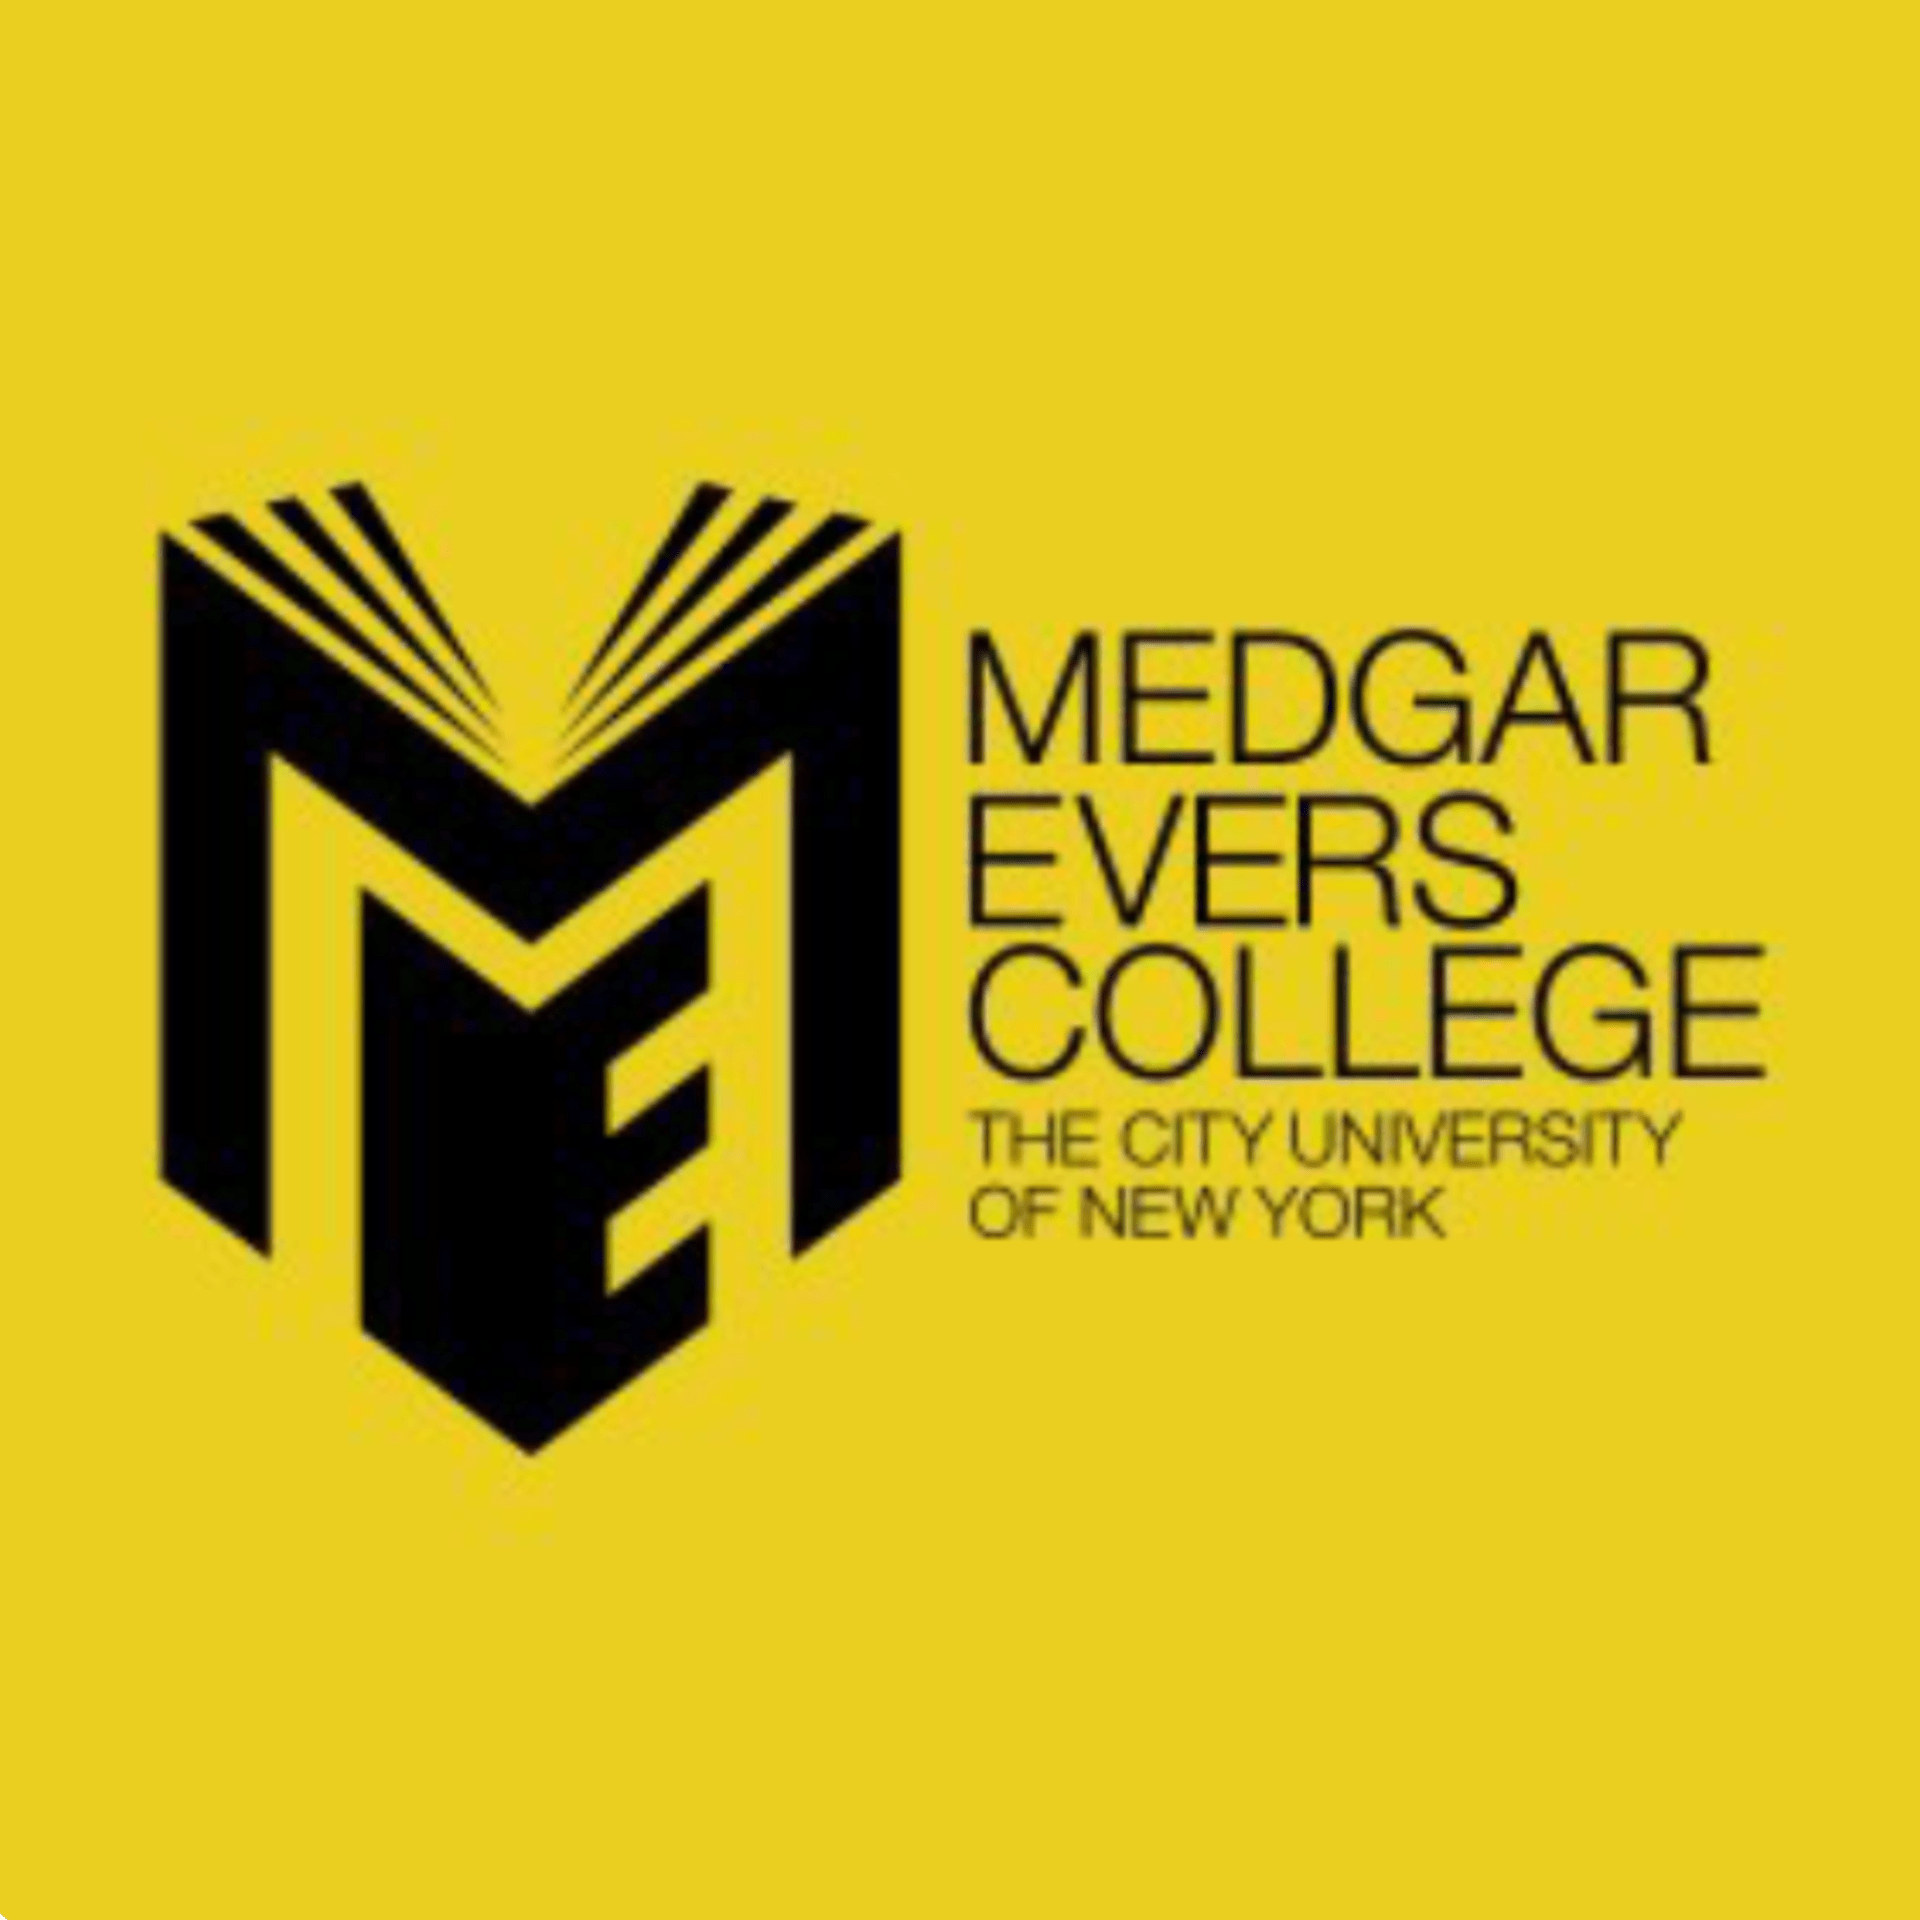 Medgar Evers College School Logo, if clicked, it will take you to their website.